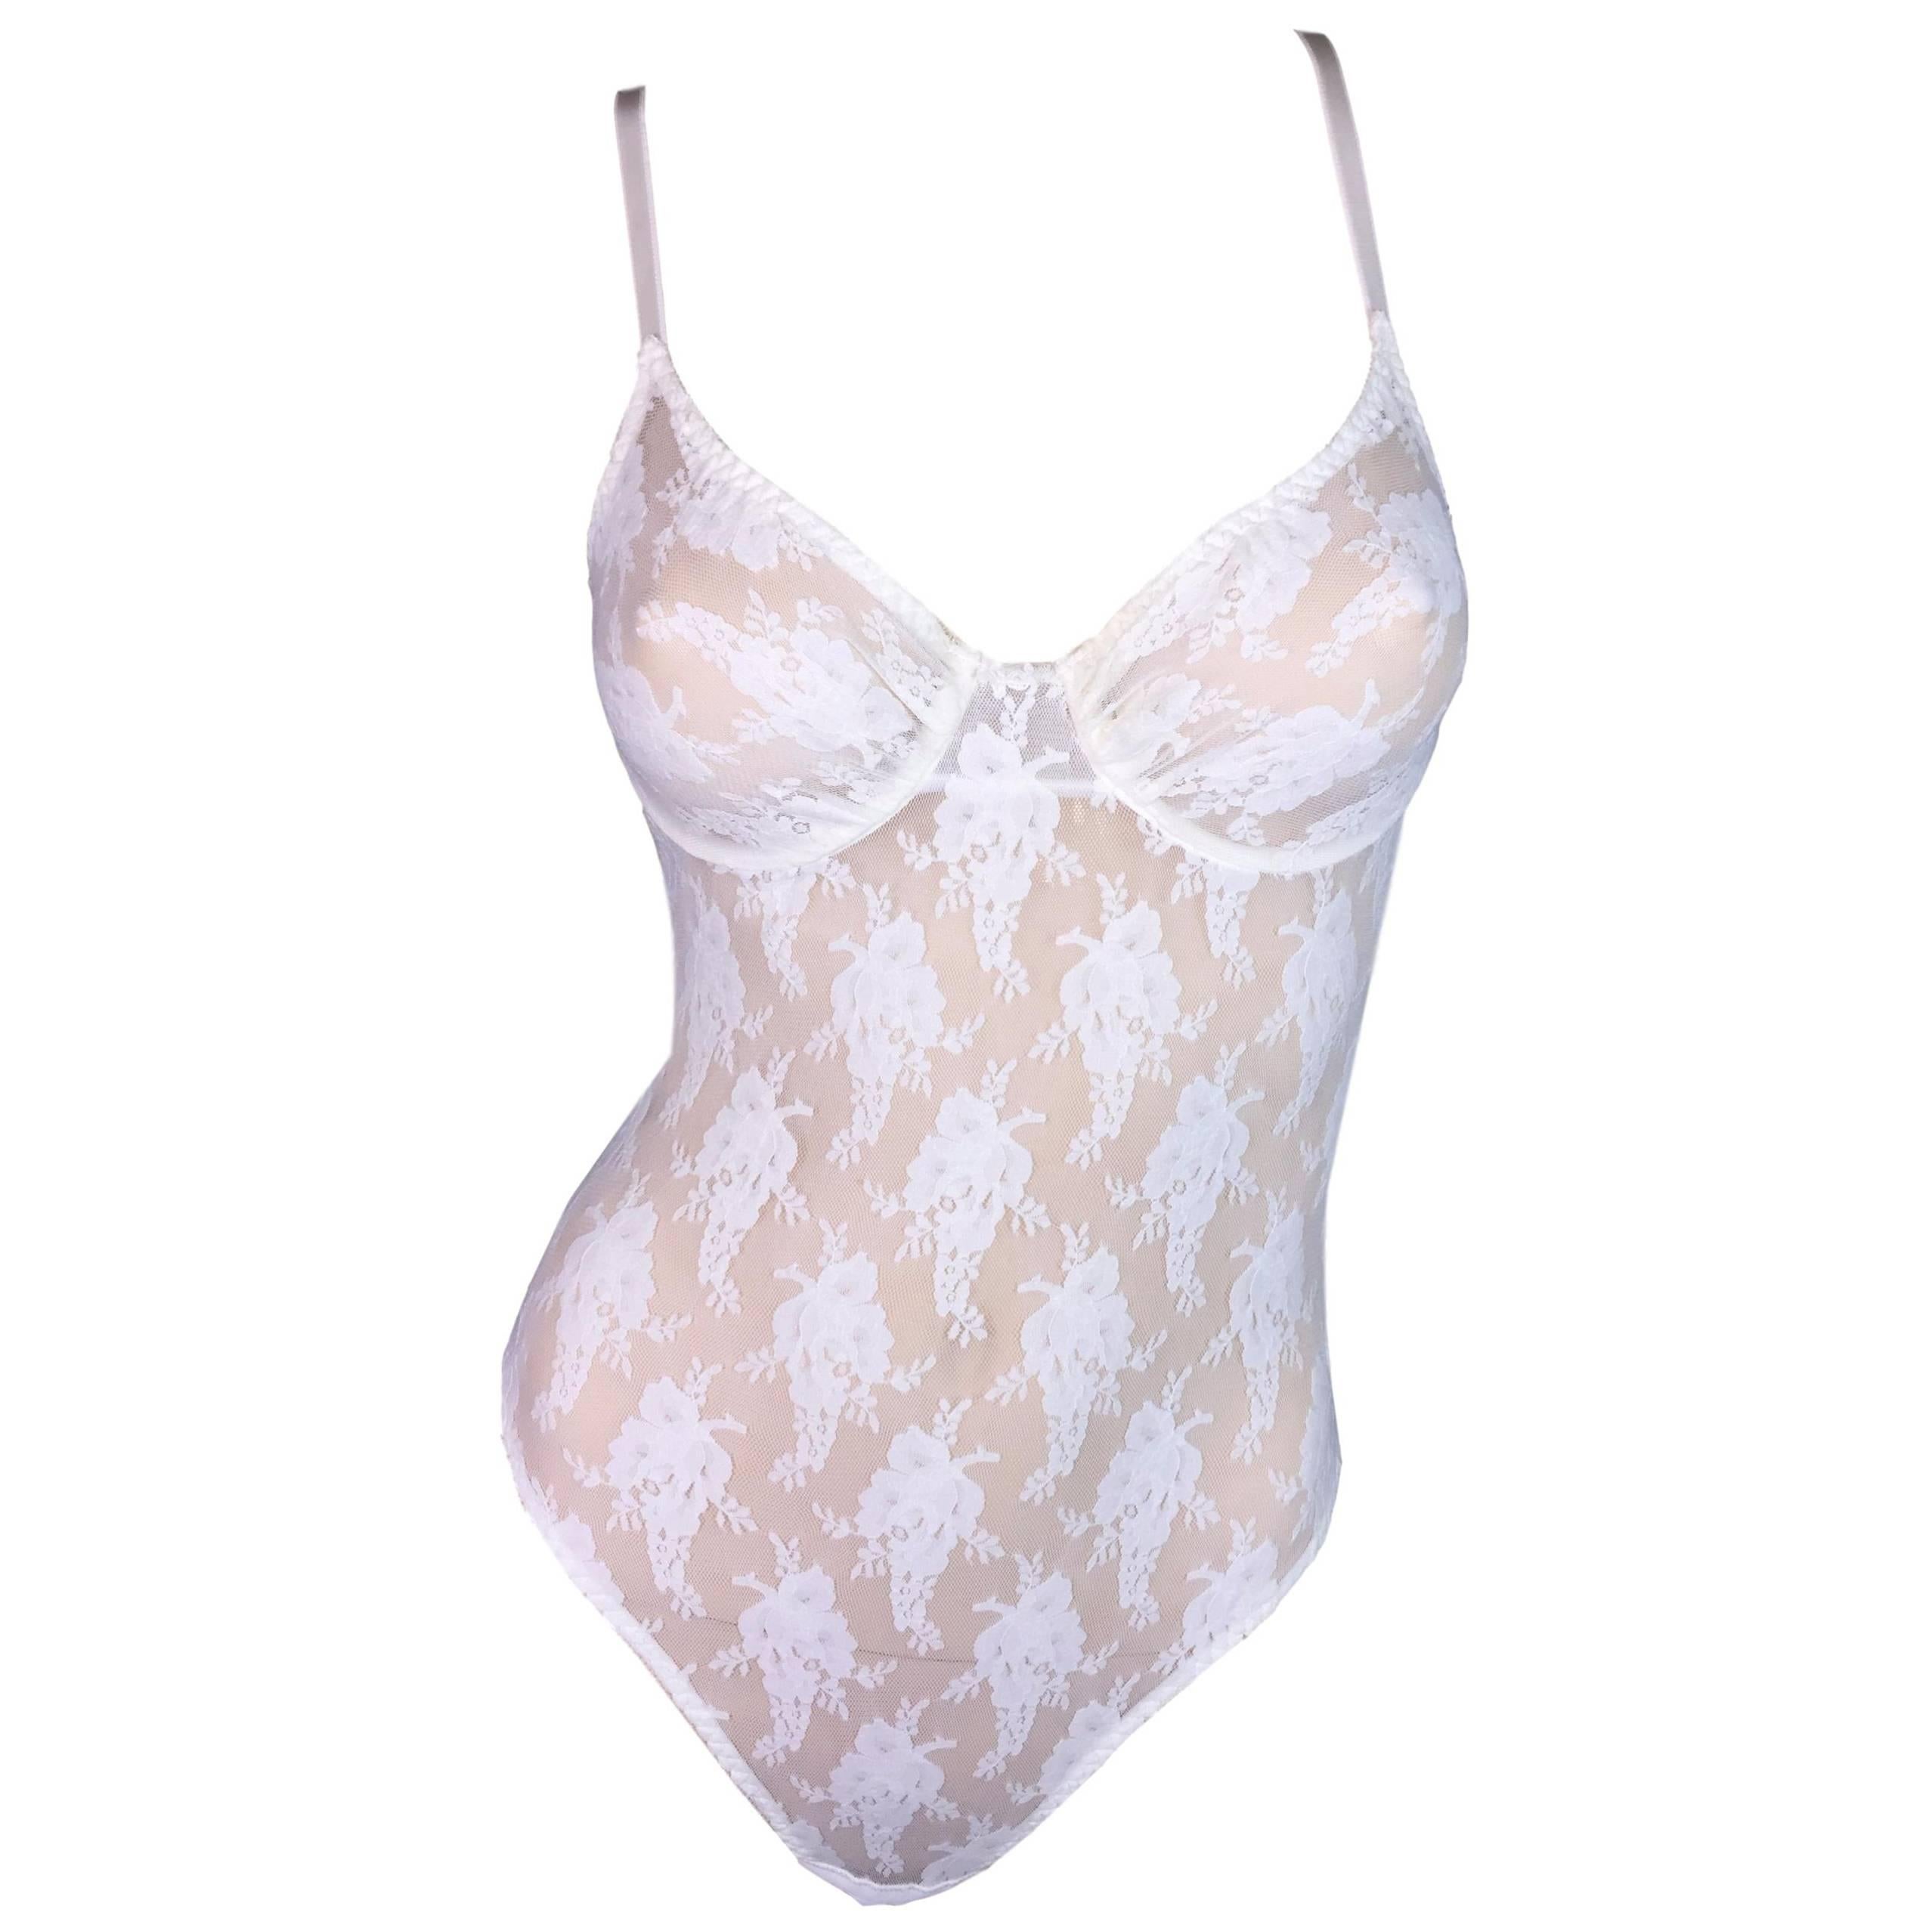 1990's Christian Dior Ivory Mesh Lace Sheer Underwire Bodysuit Top S